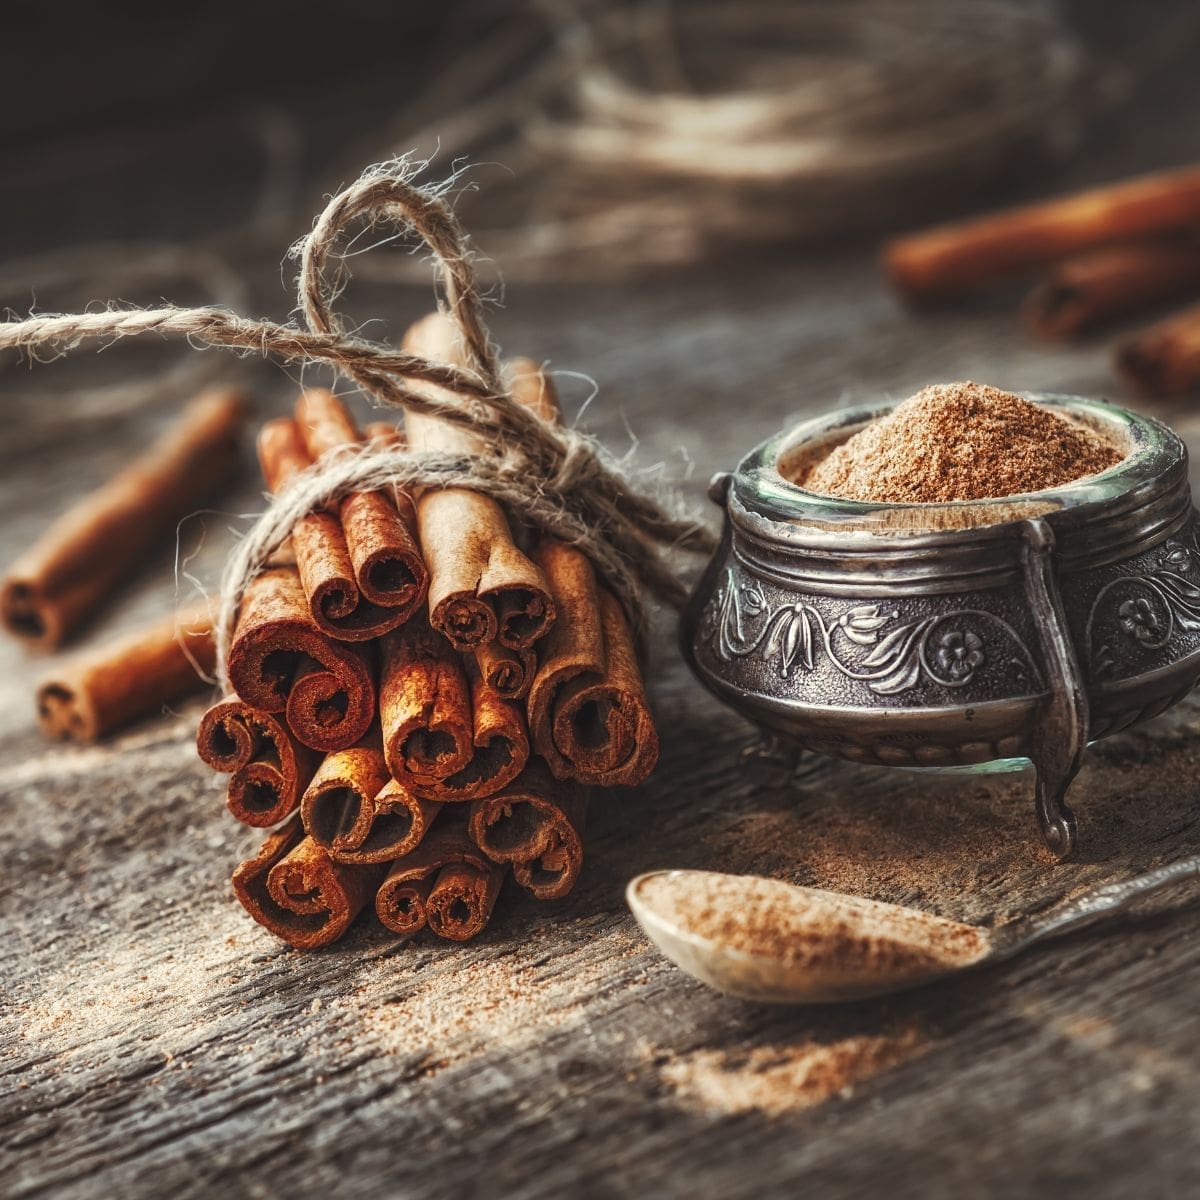 Does Cinnamon Go Bad? Here’s How To Store It.